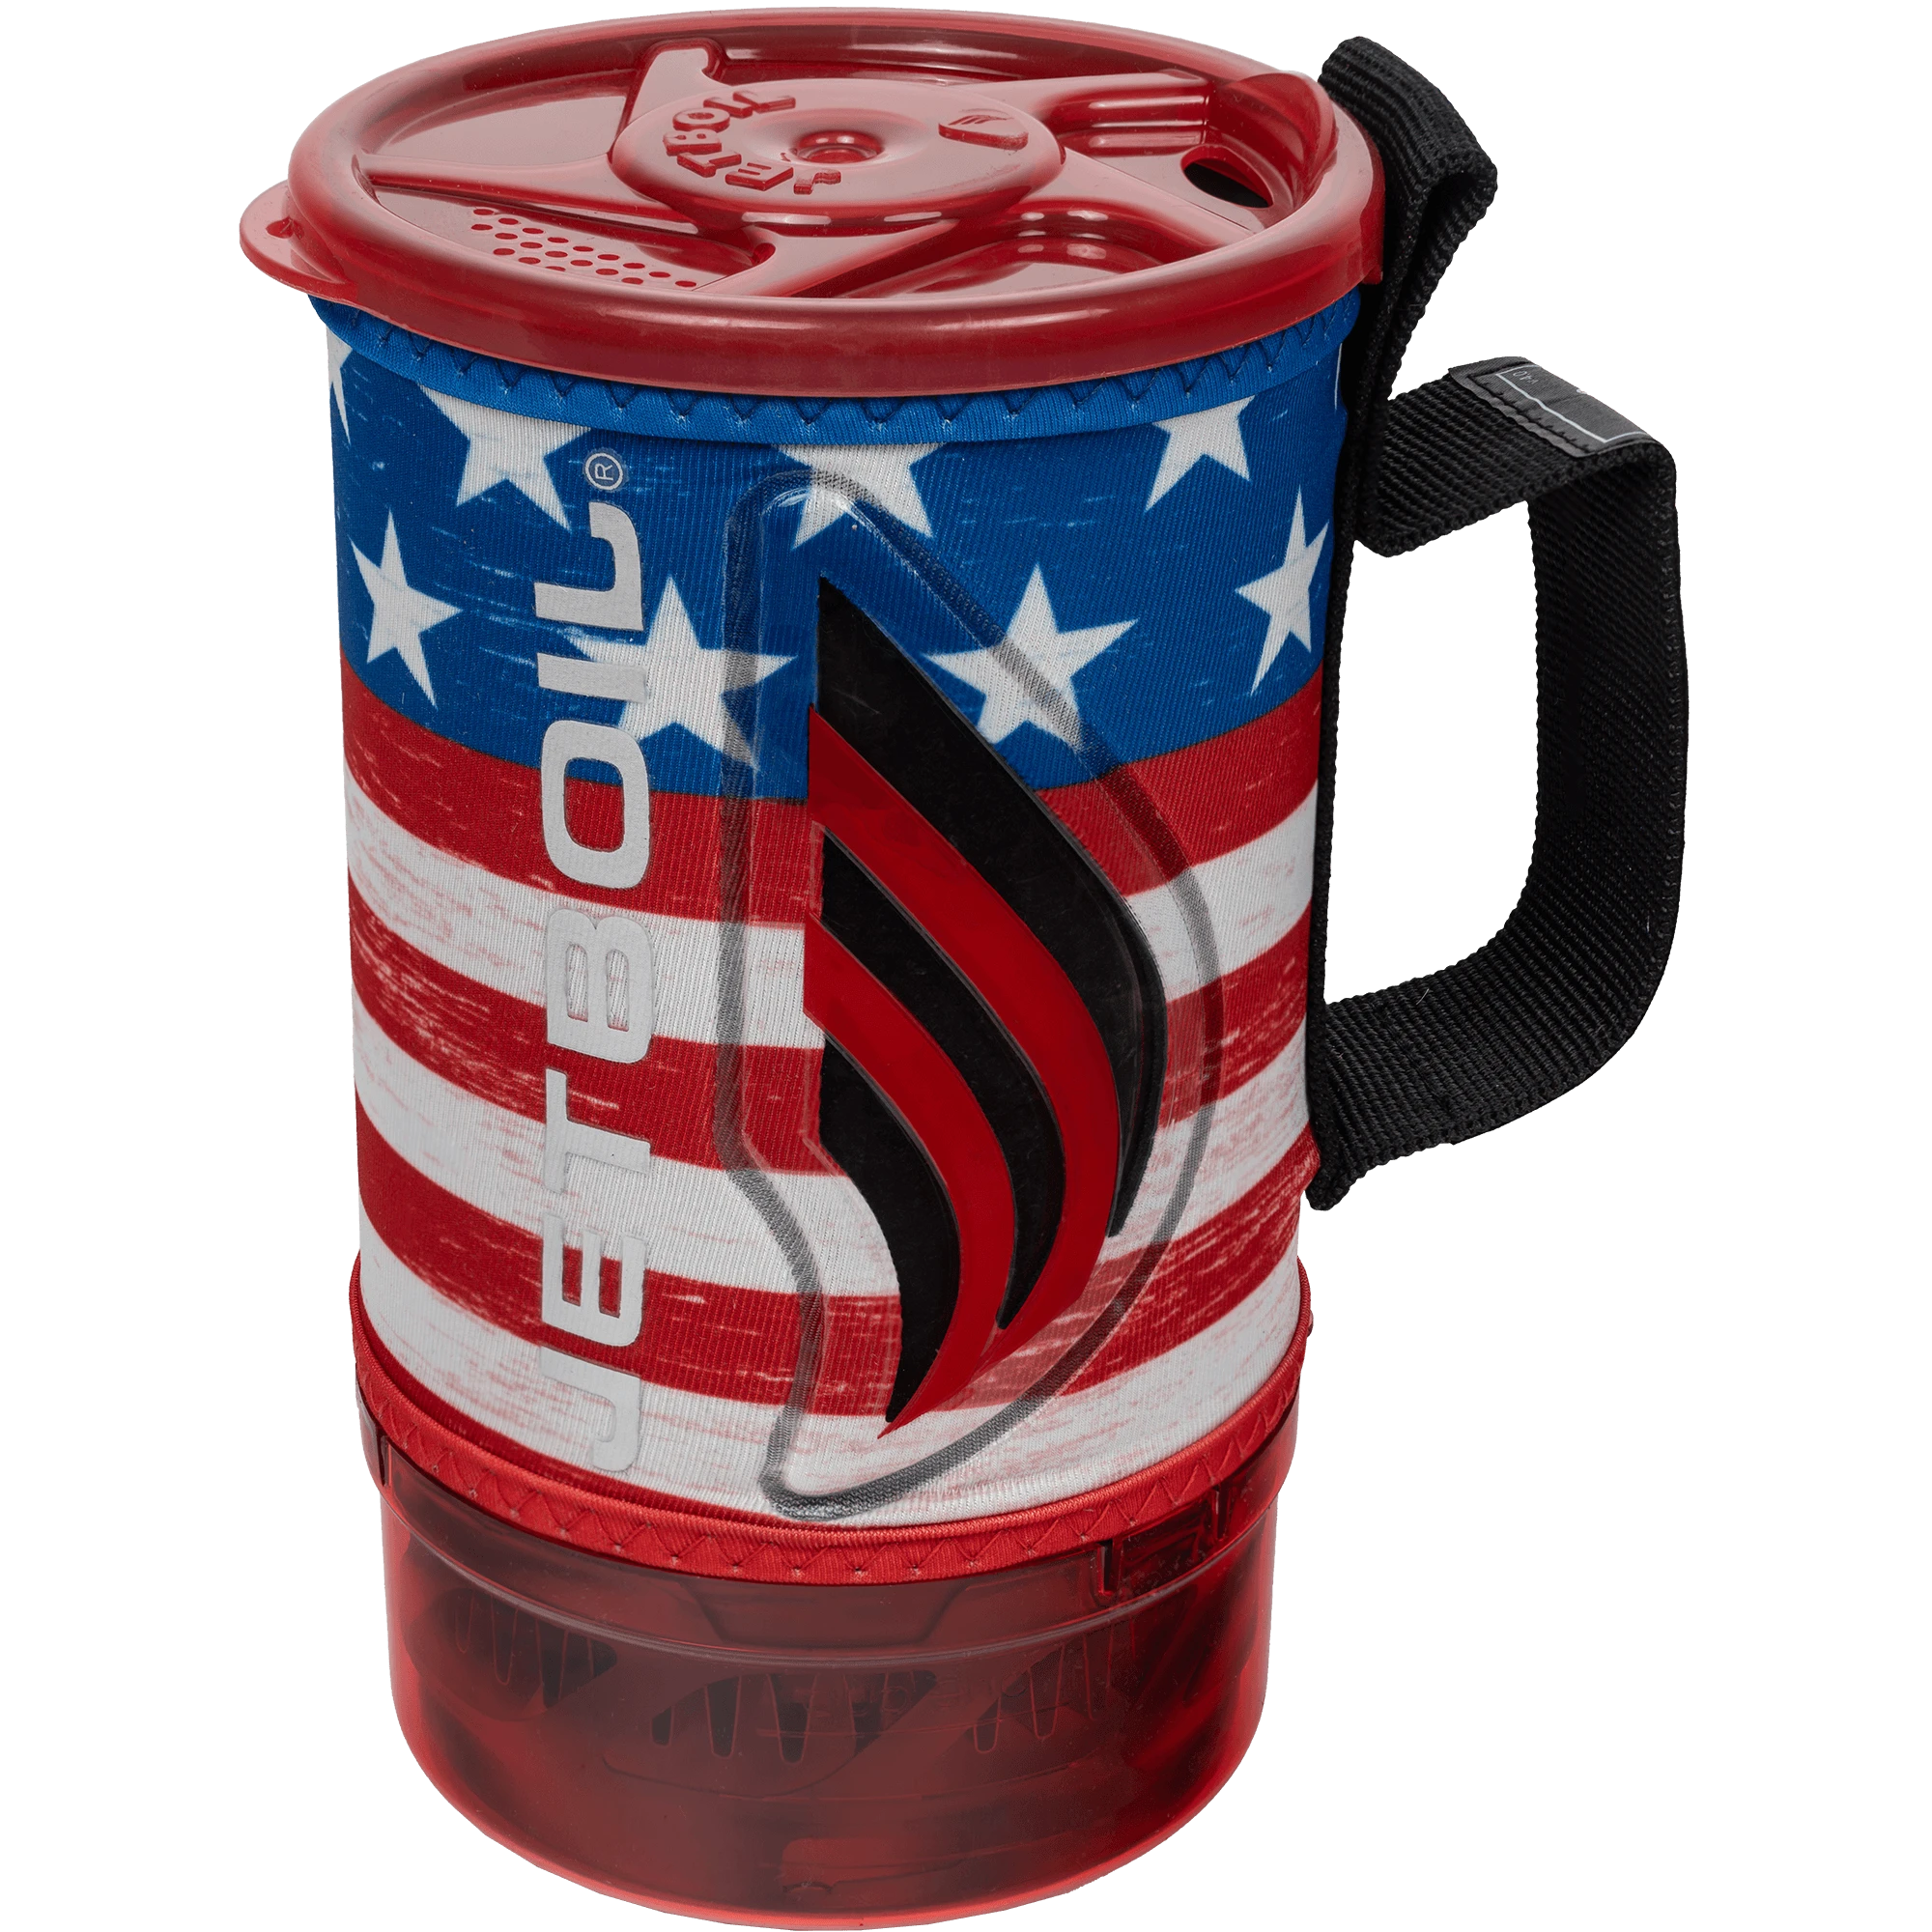 Packed Jetboil Flash Cooking System - Patriotic